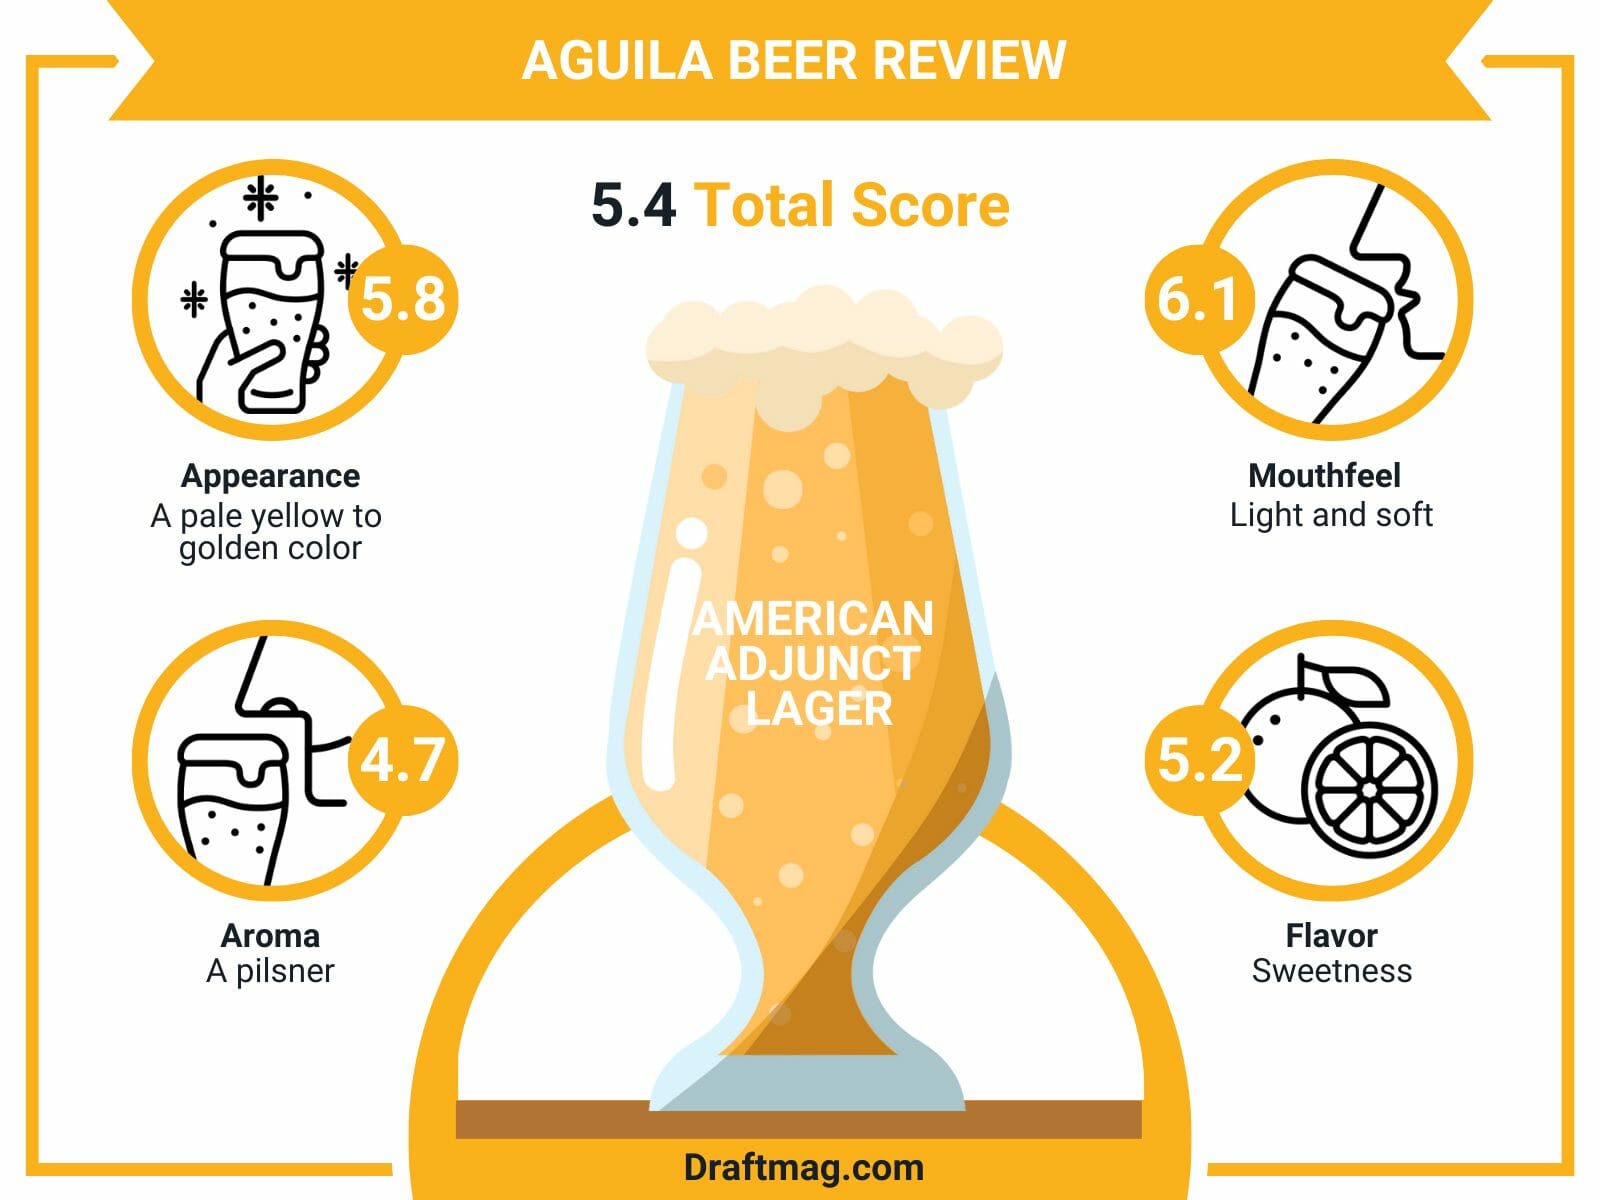 Aguila beer review infographic